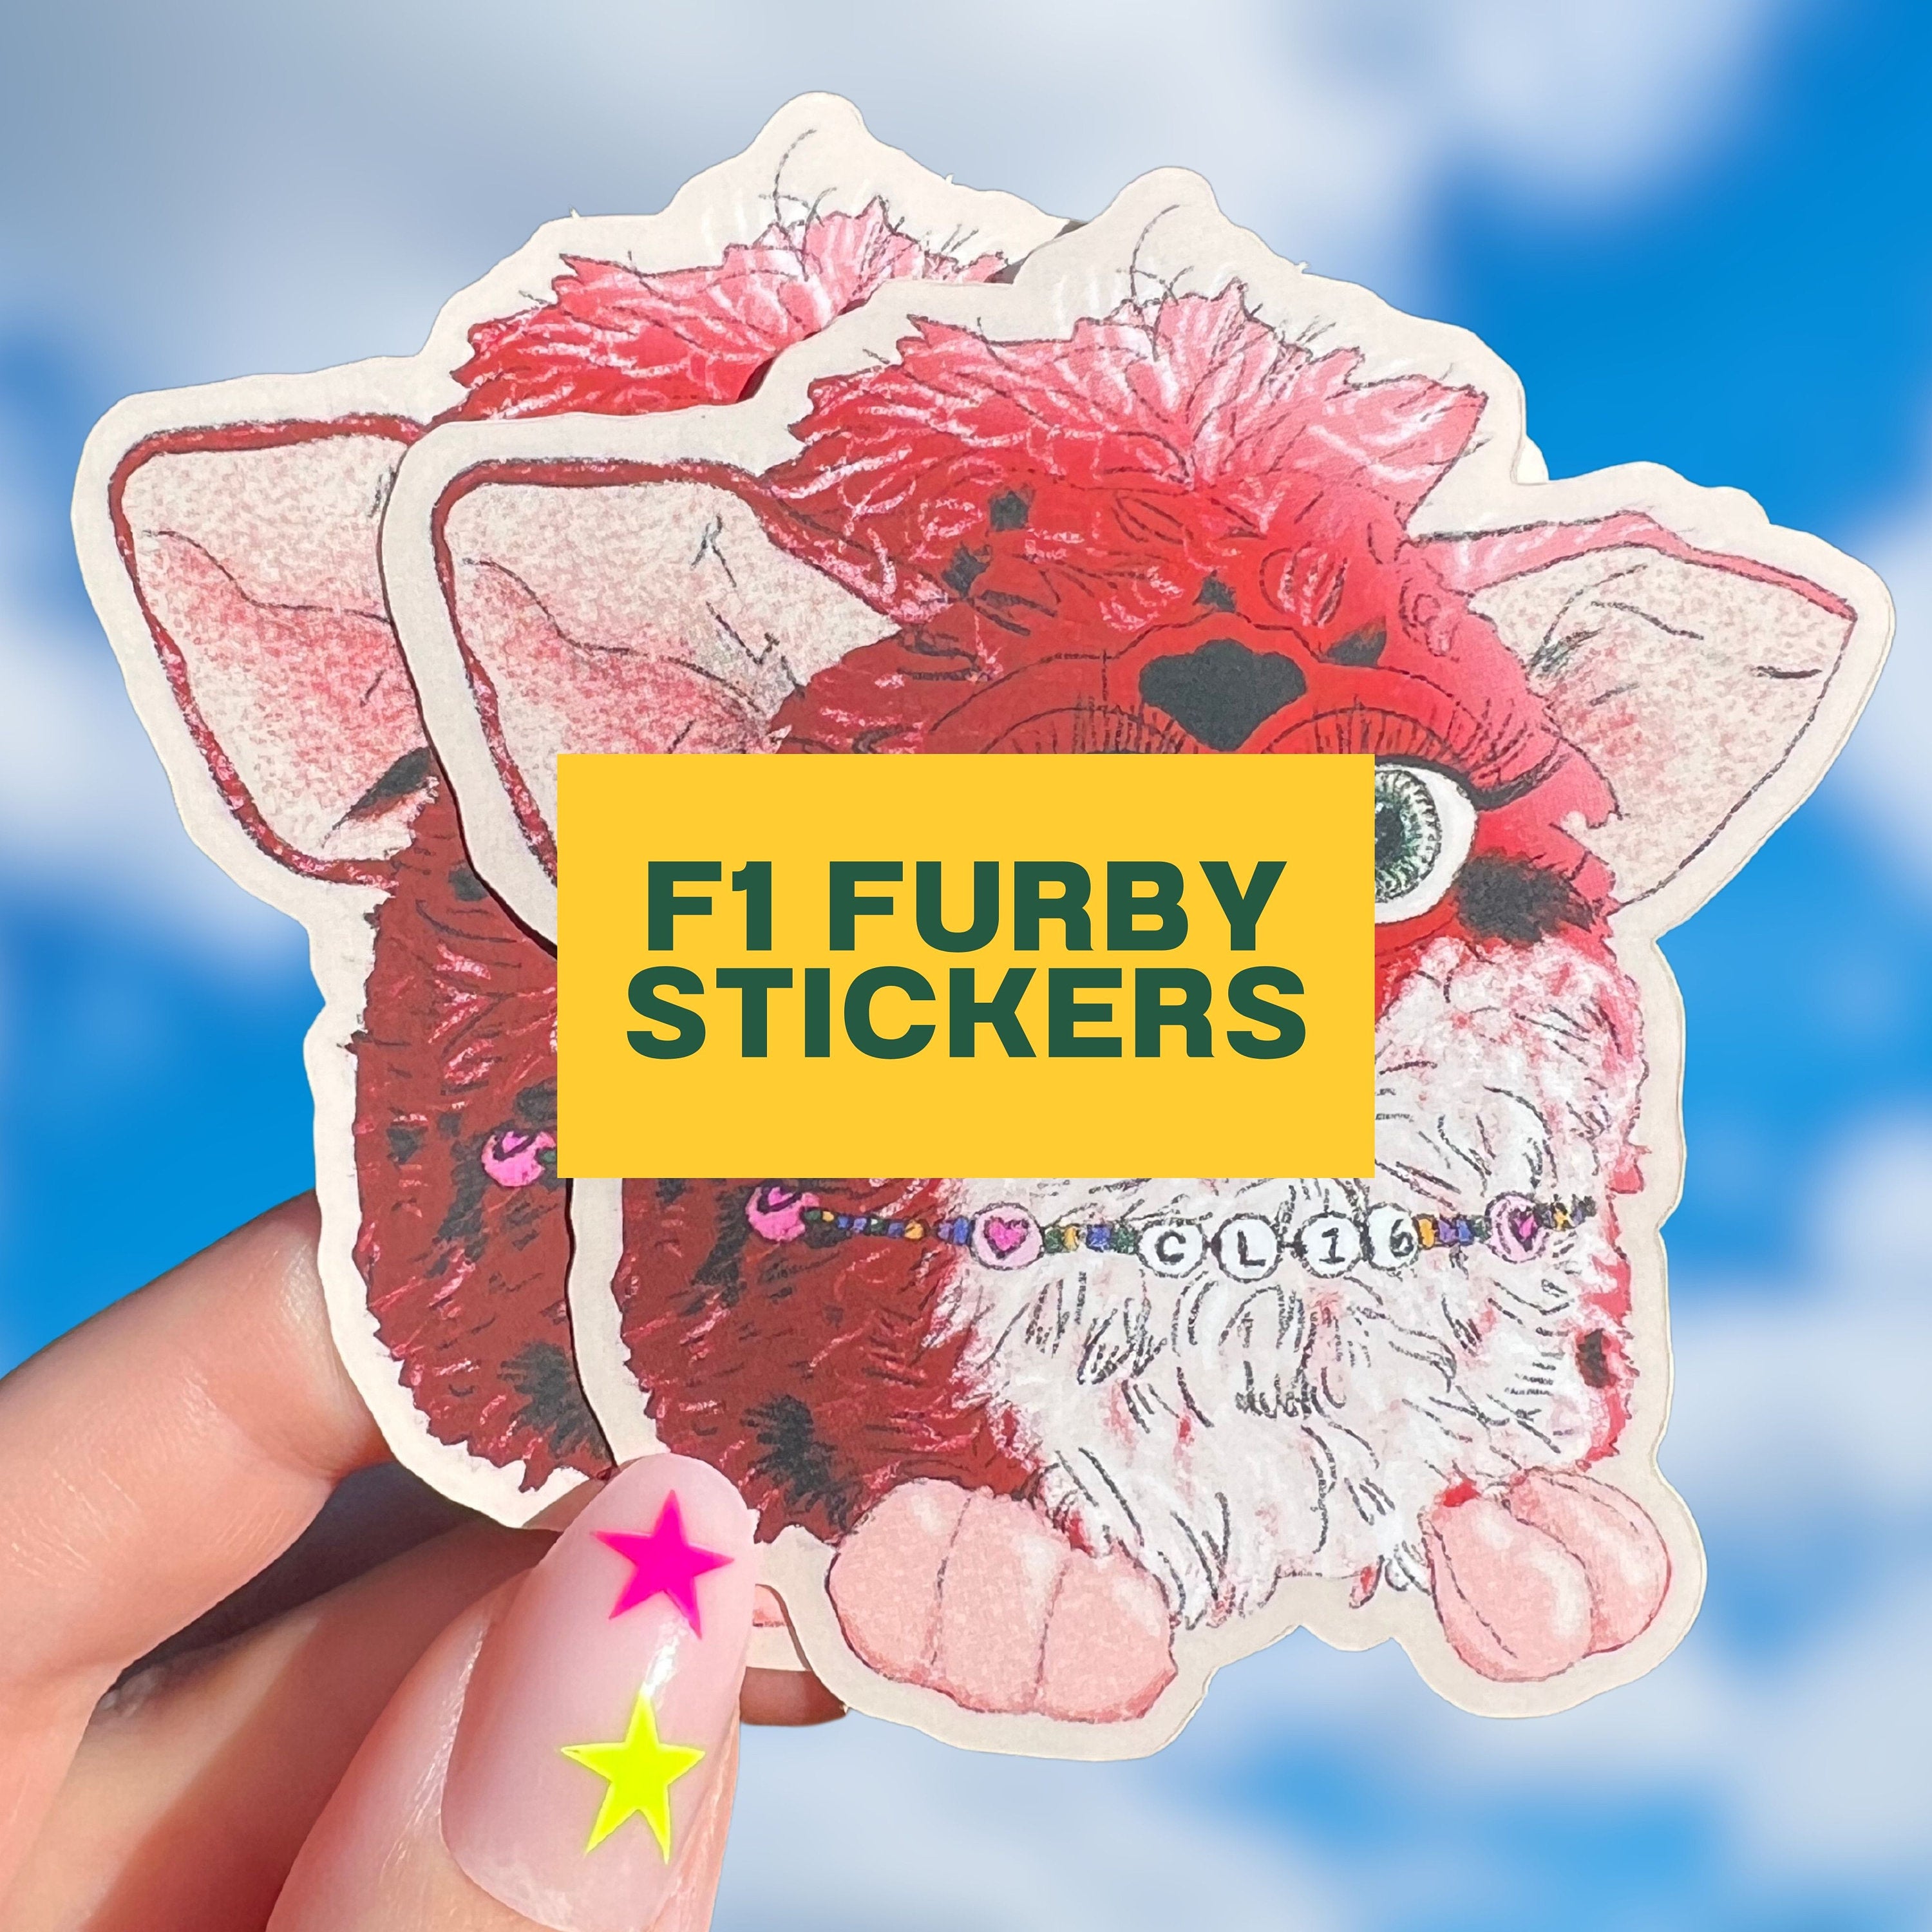 F1 stickers | Furby F1 stickers | F1 sticker for notebooks, laptops, and water bottles | Charles Leclerc Lewis Hamilton Max Verstappen F1